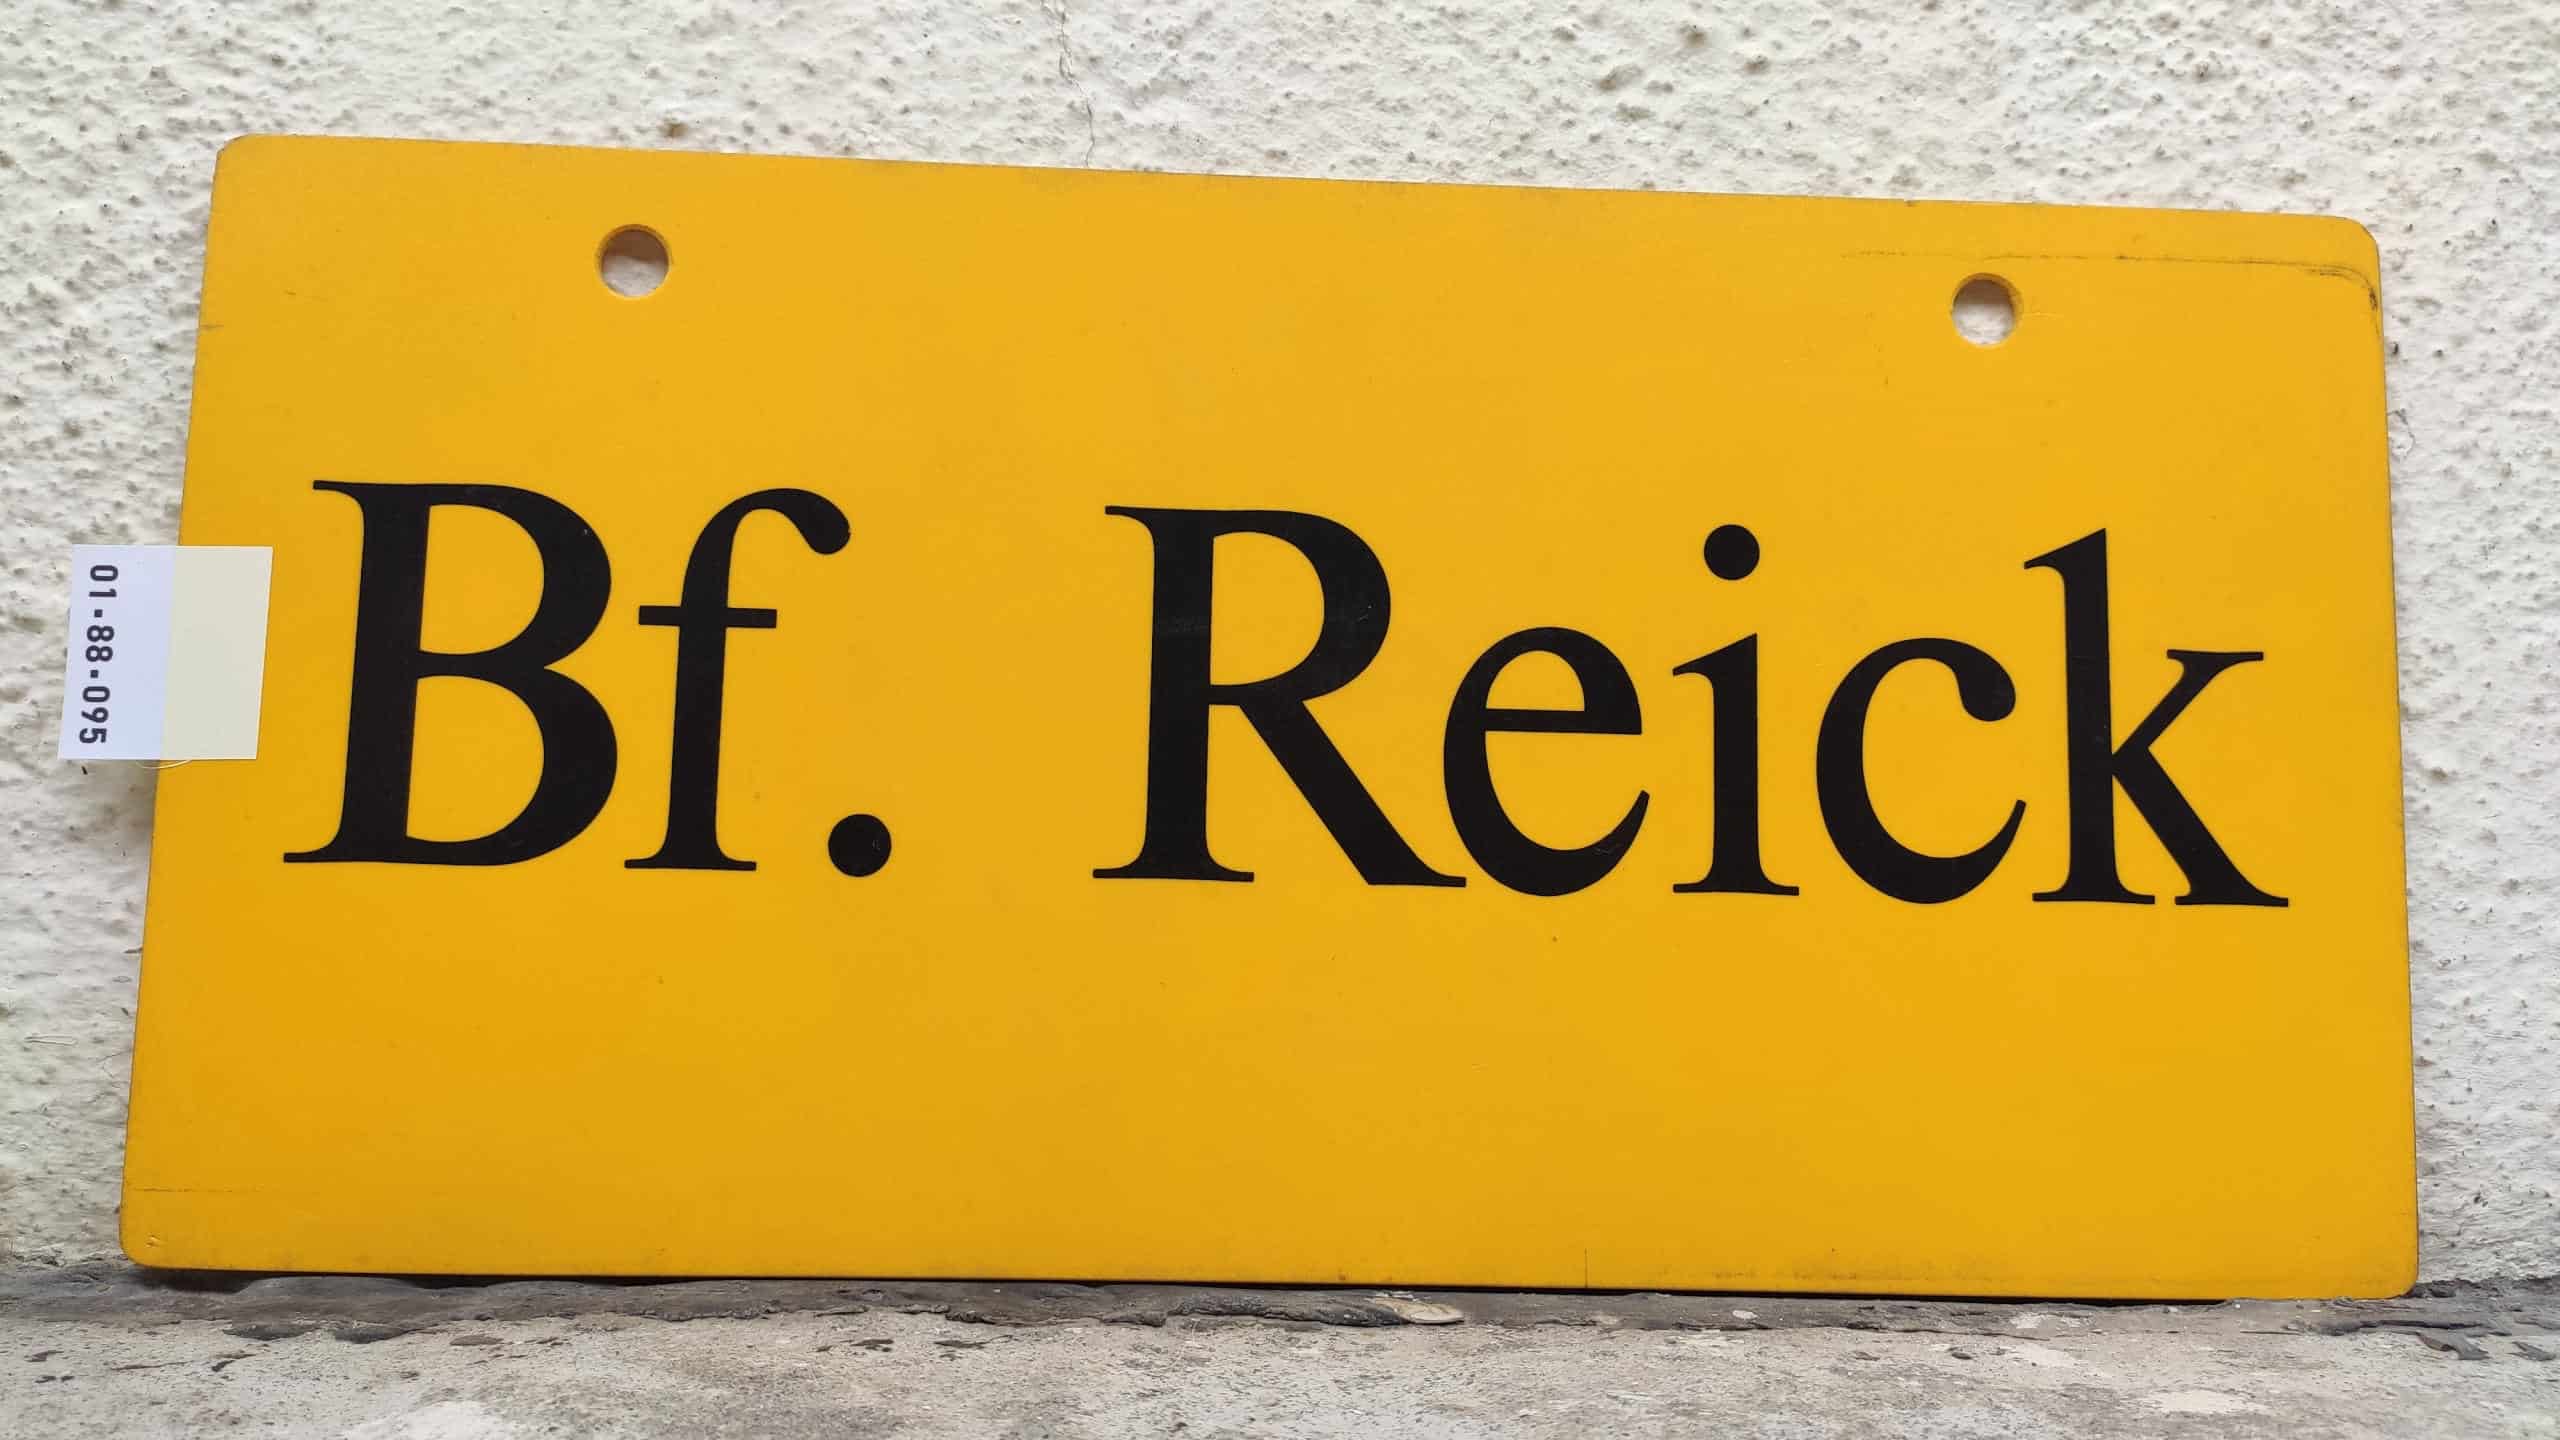 Bf. Reick